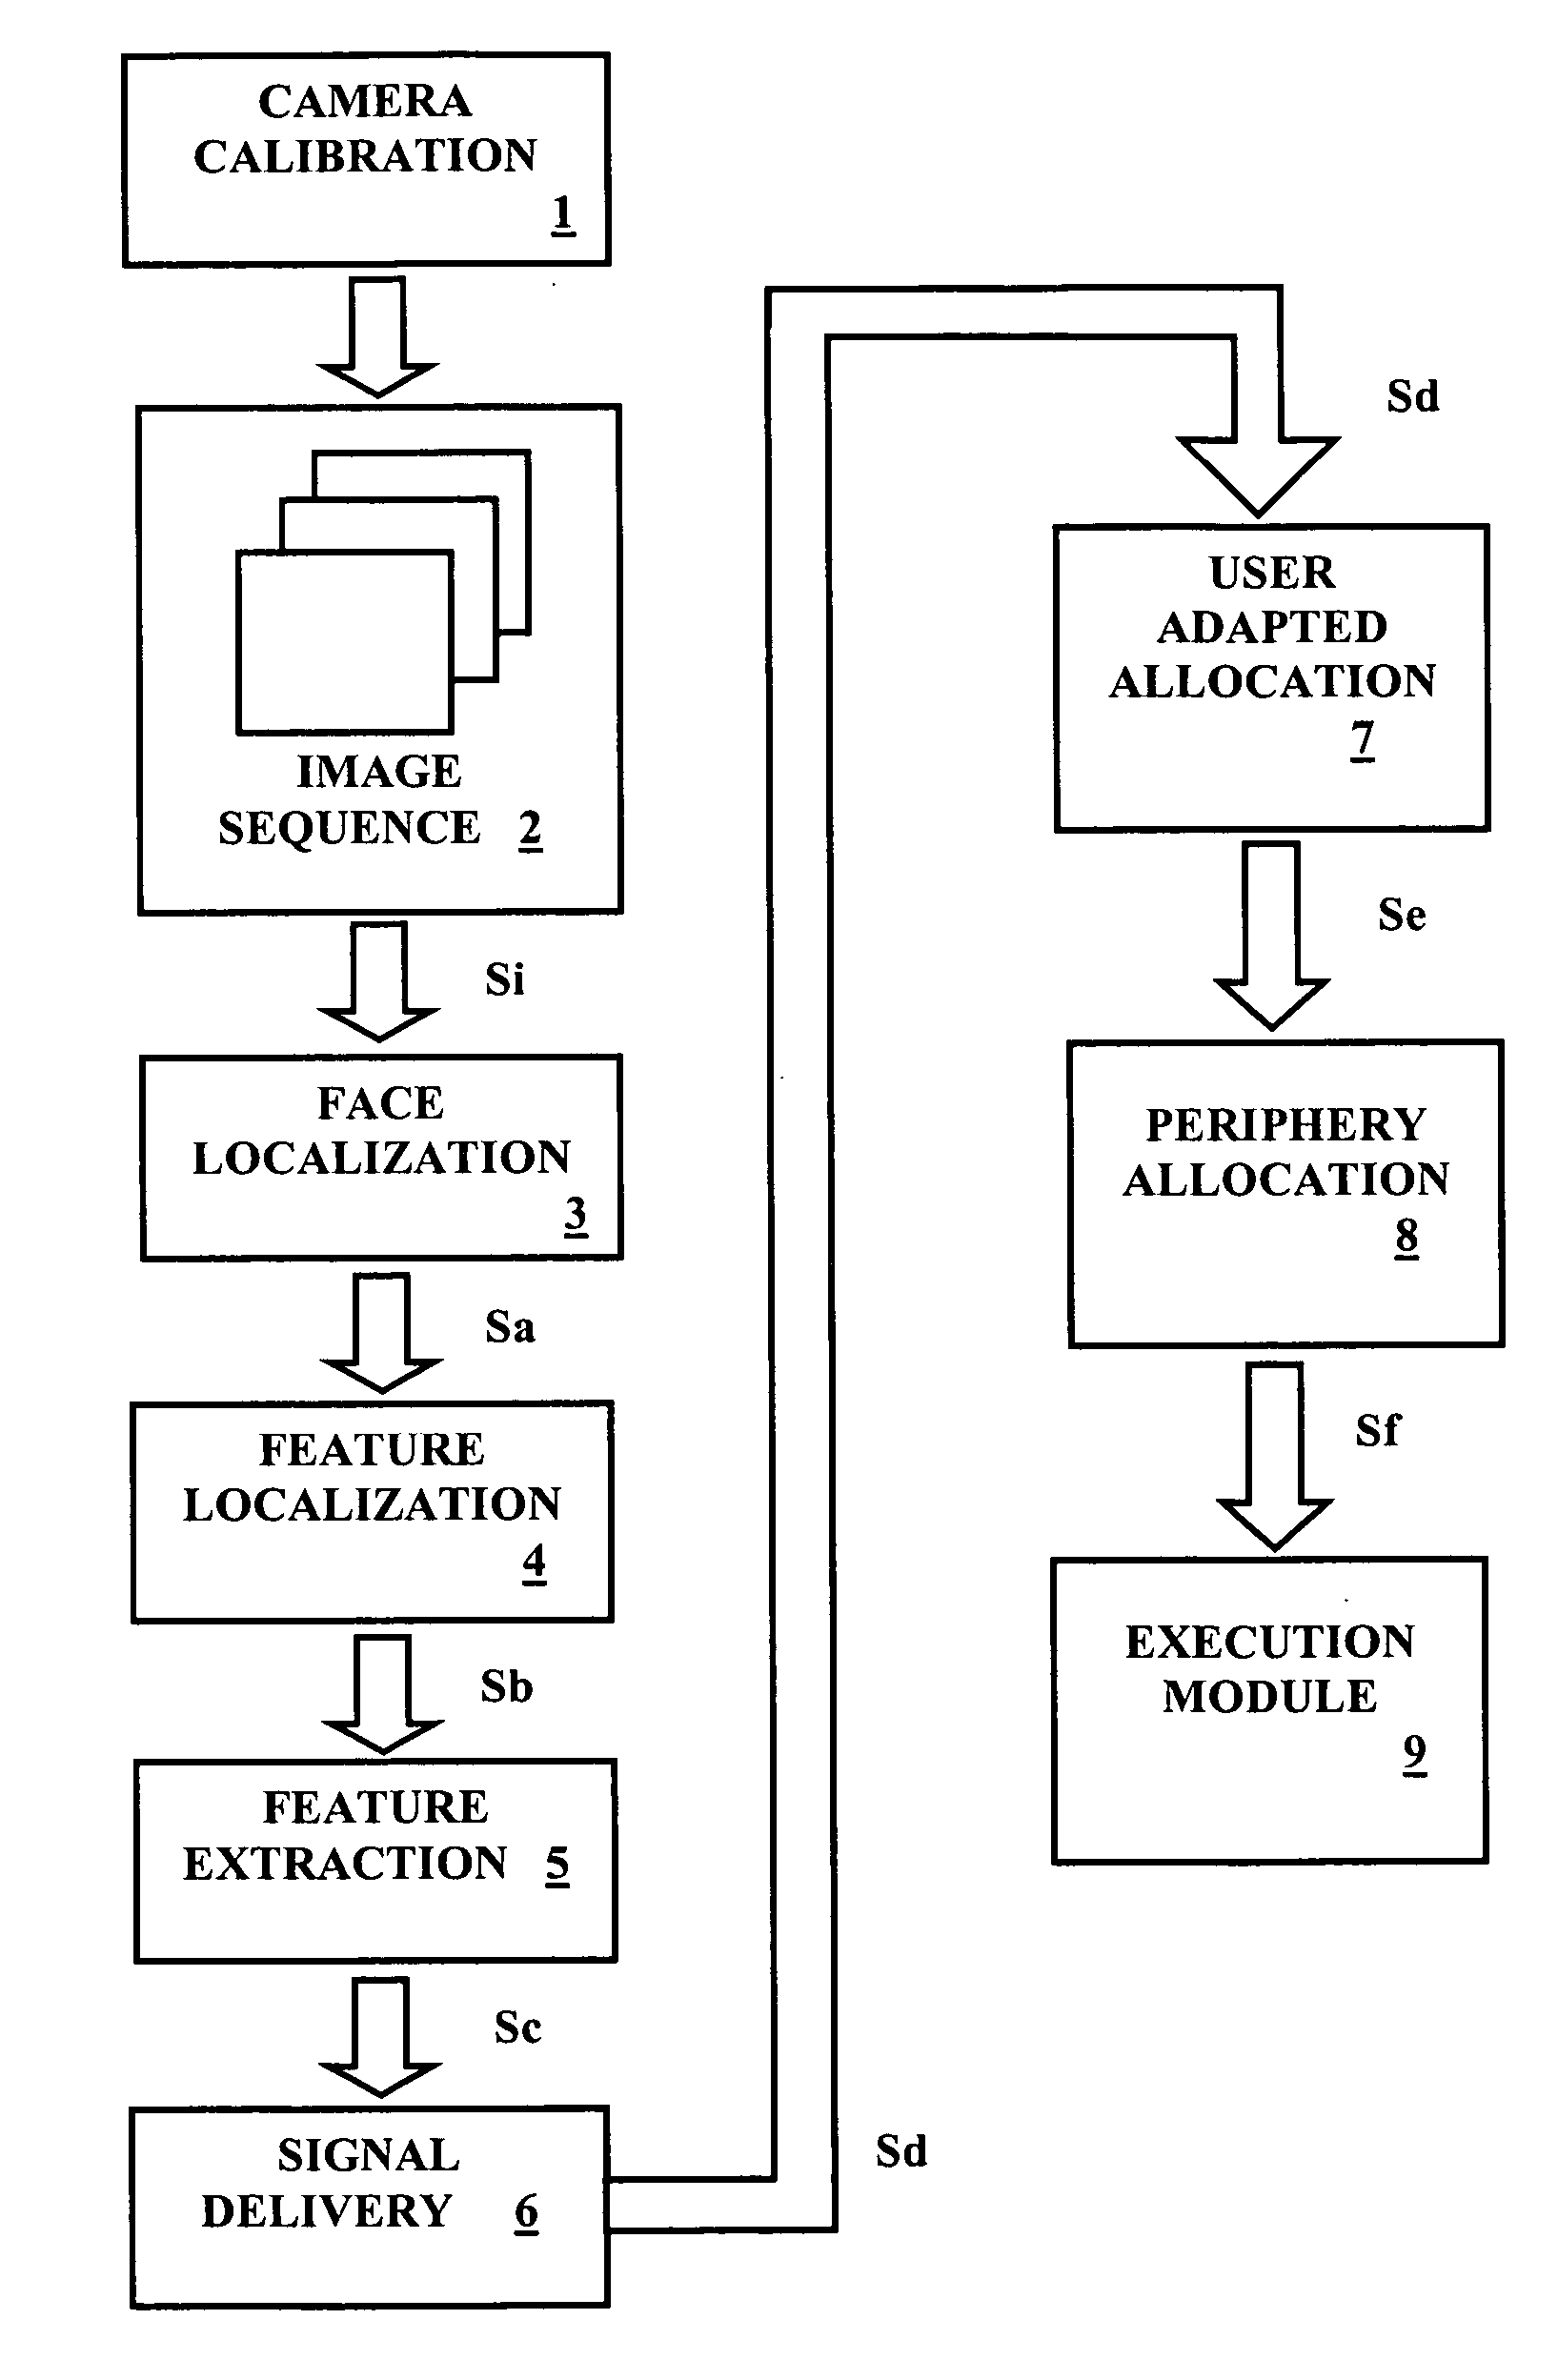 Facial feature analysis system for users with physical disabilities